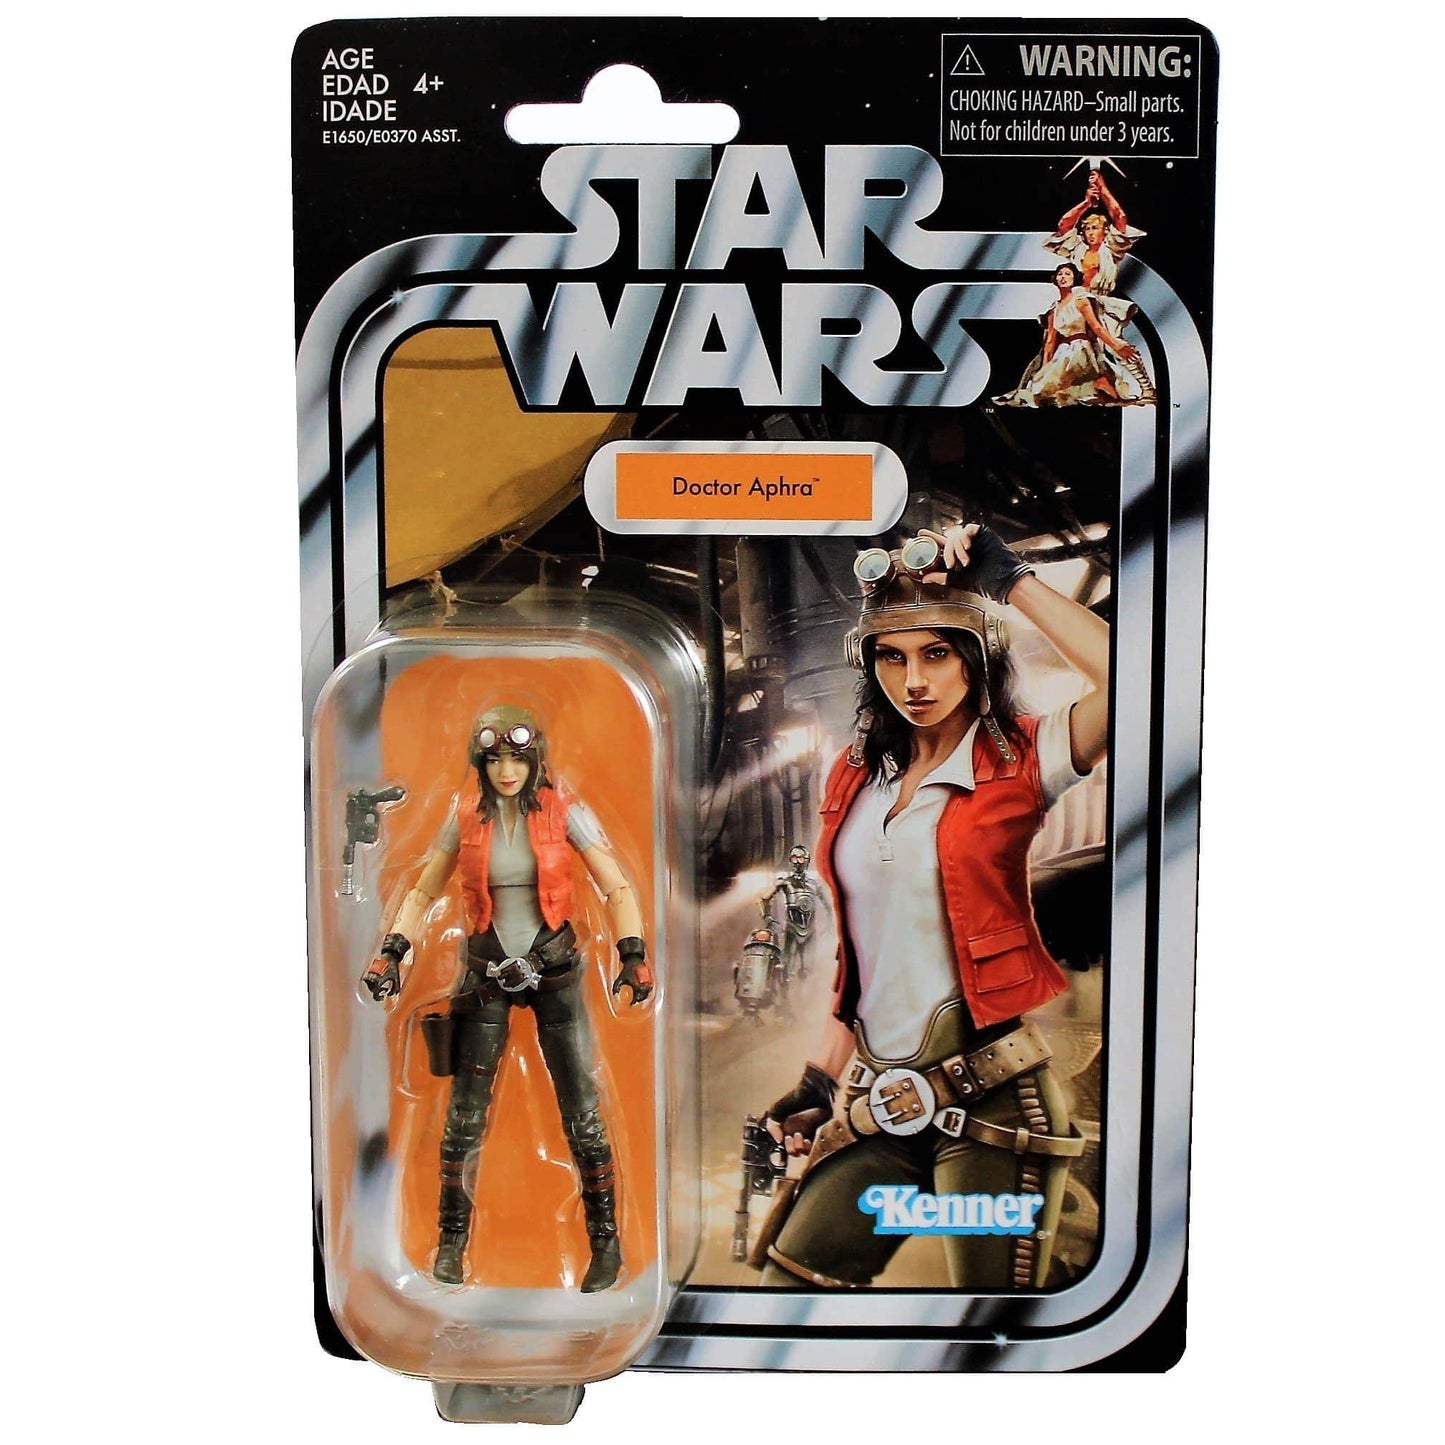 Star Wars "The Vintage Collection" Doctor Aphra 3 3/4-Inch Action Figure